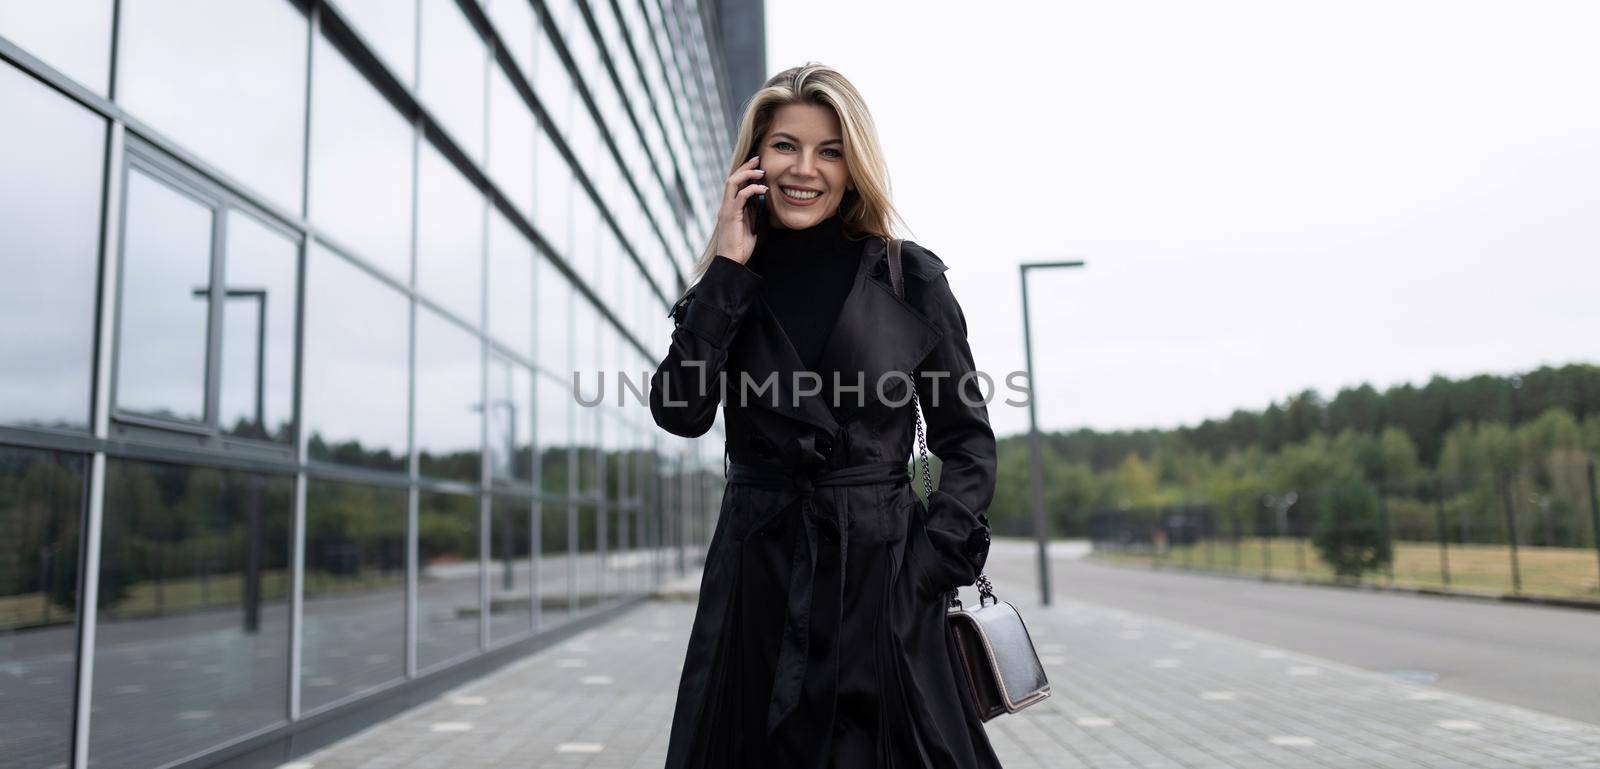 woman businesswoman rushing about business talking on mobile phone with a smile on her face.